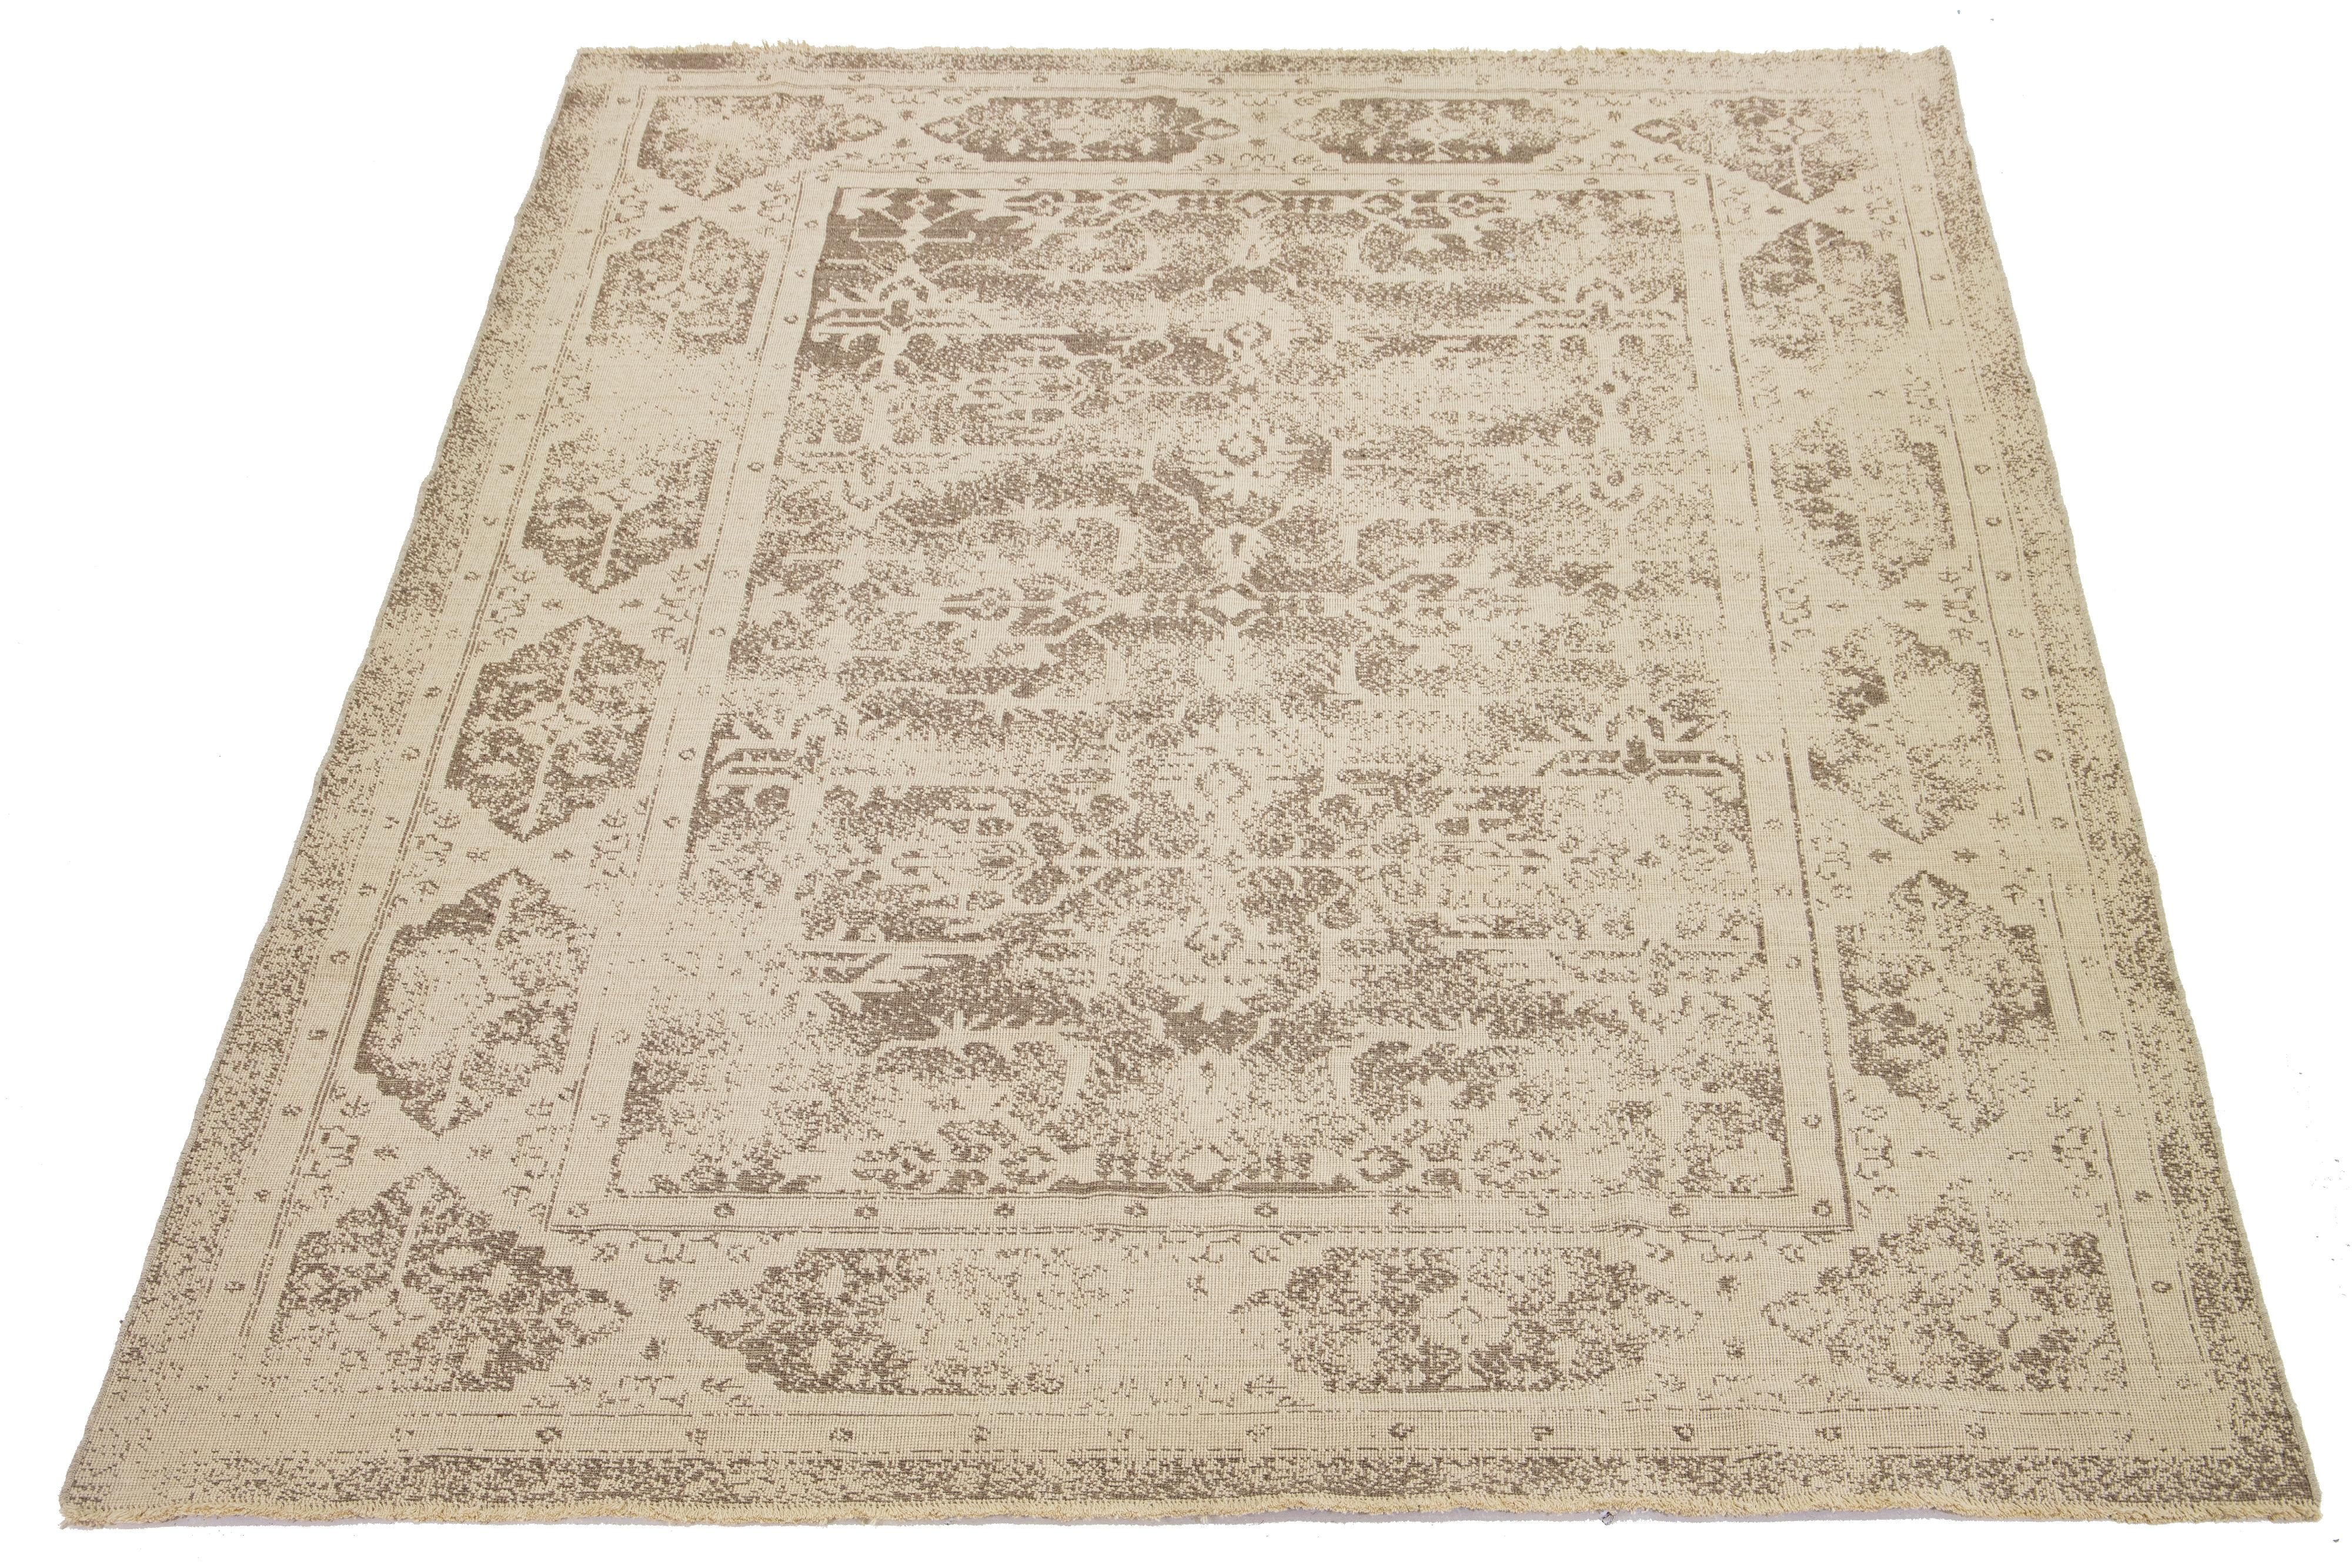 This beige wool rug features a light brown all-over pattern that beautifully complements the background.

This rug measures 9'8